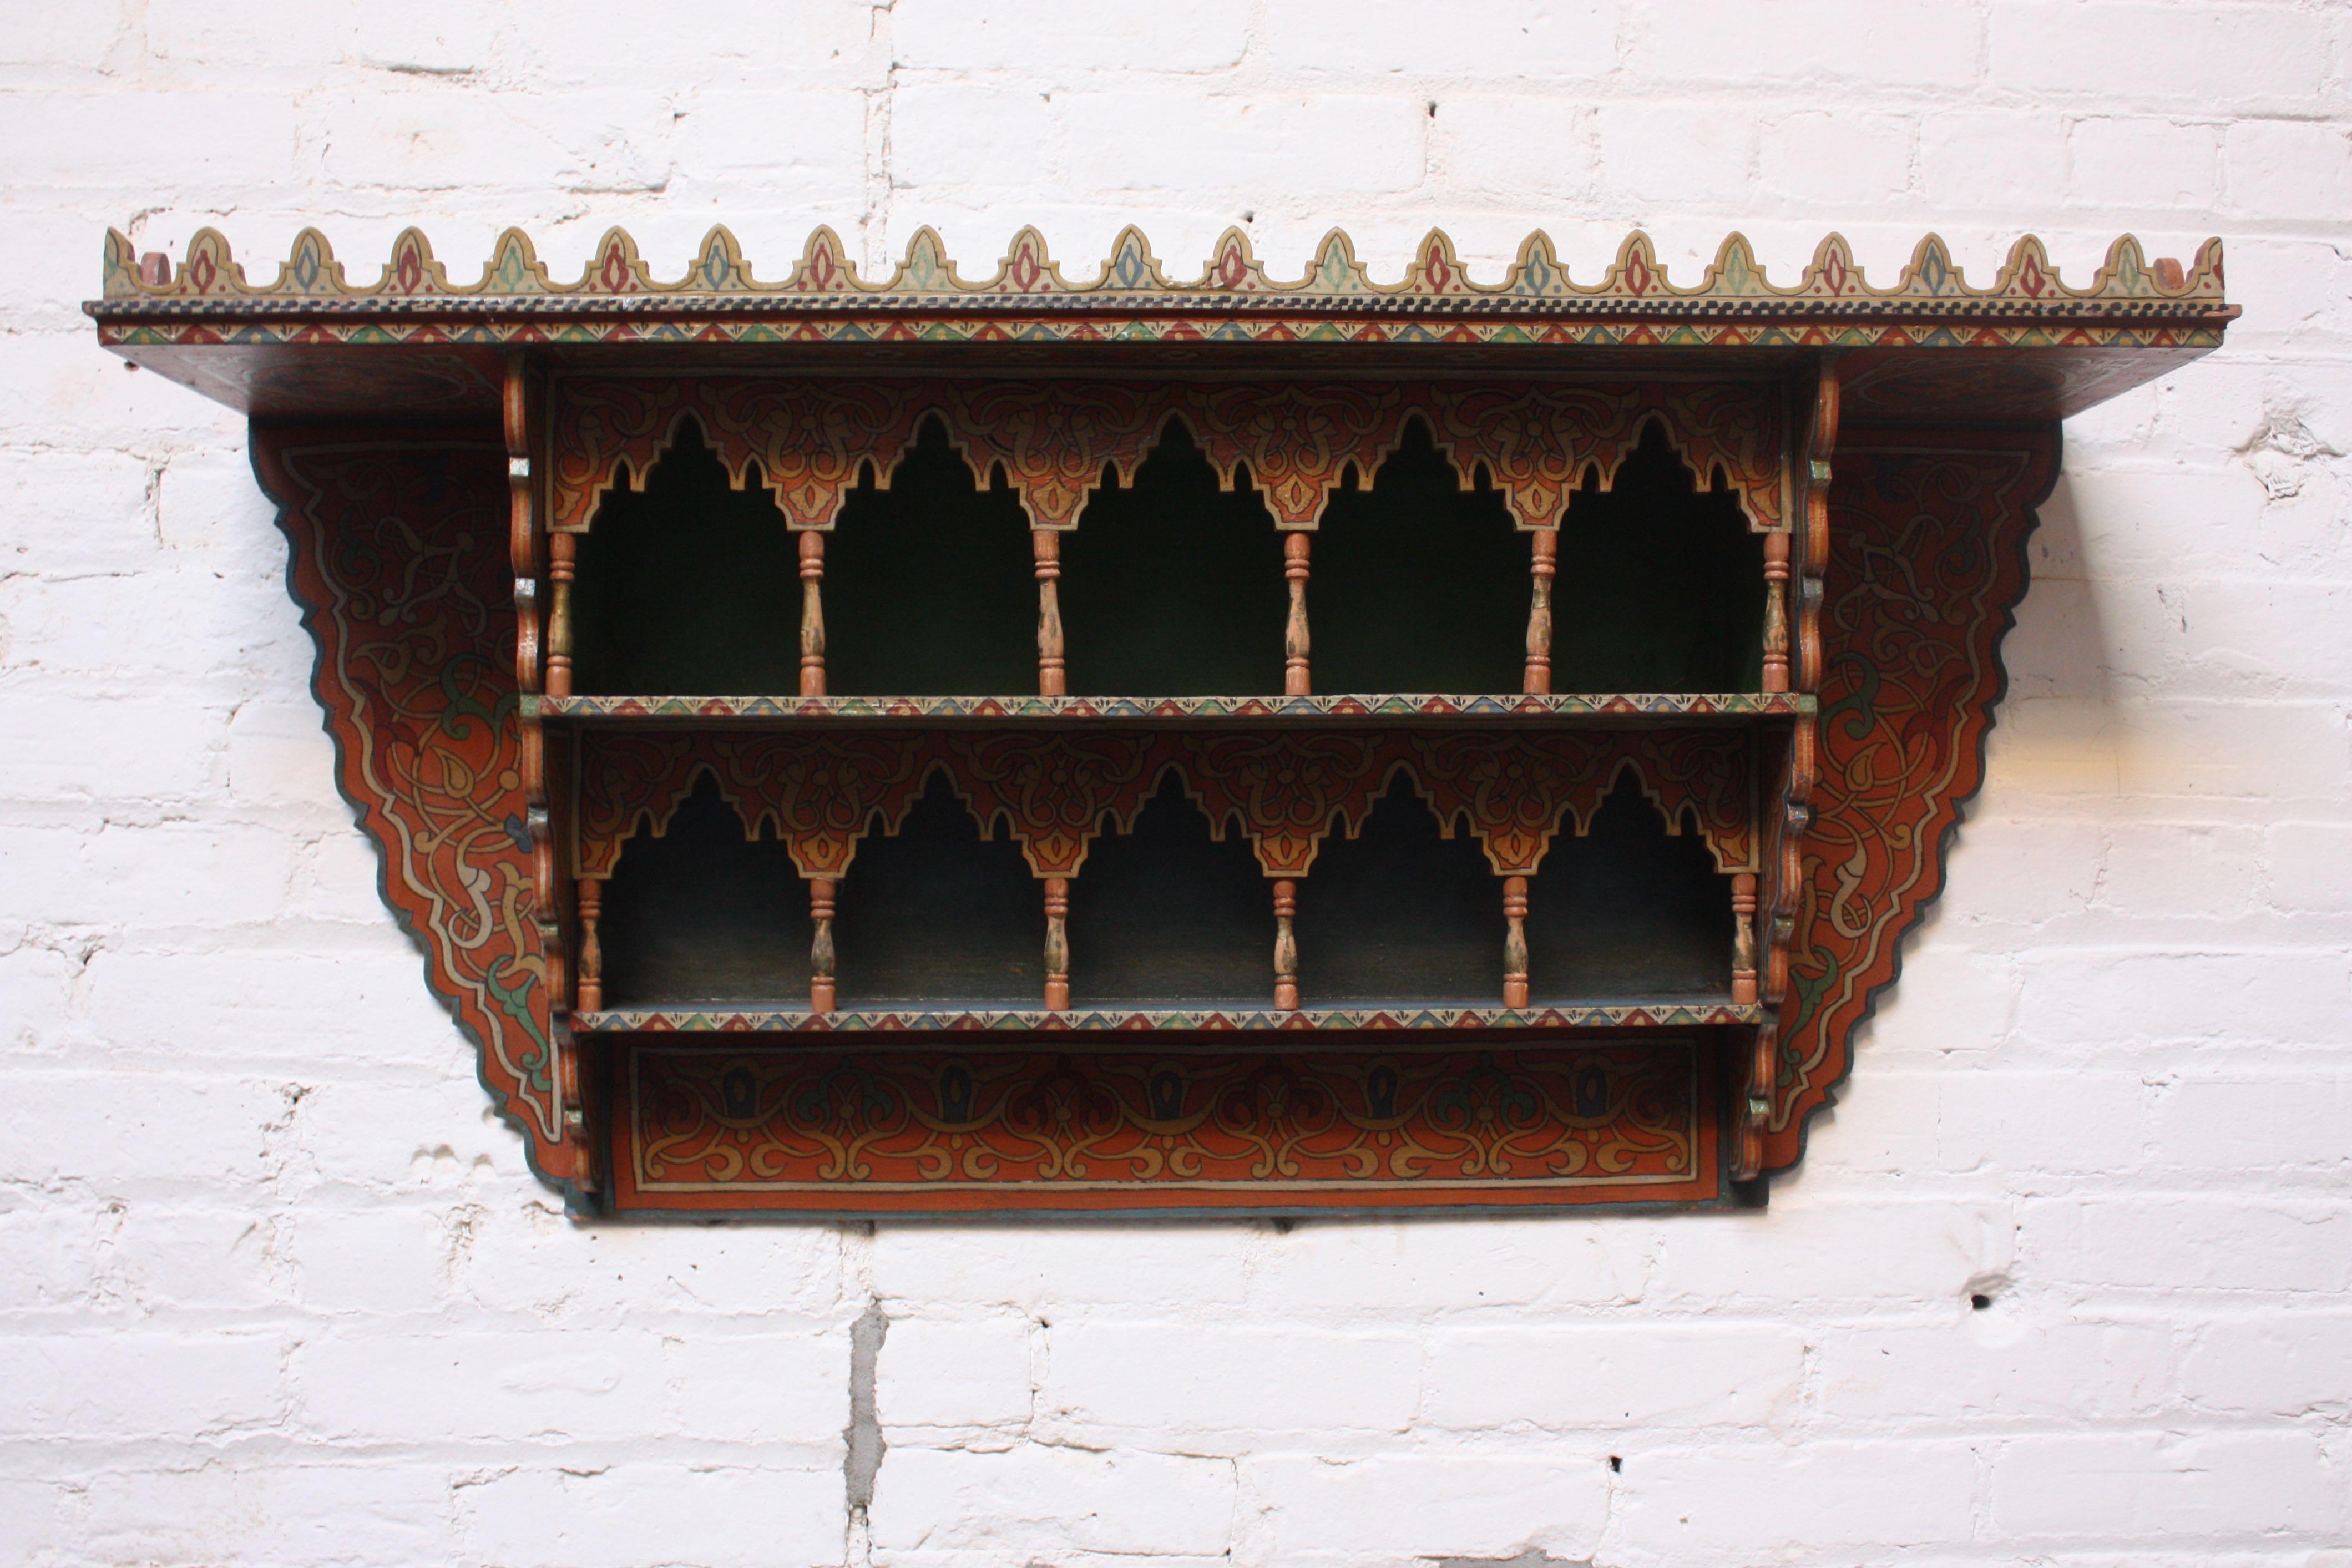 Whimsical Folk Art shelf (circa 1920s, USA) featuring carved and hand painted decoration. There are three tiers for storage in sky blue, green, and blue with carved and painted 'columns' adorning the two lower shelves. Given the restriction imposed